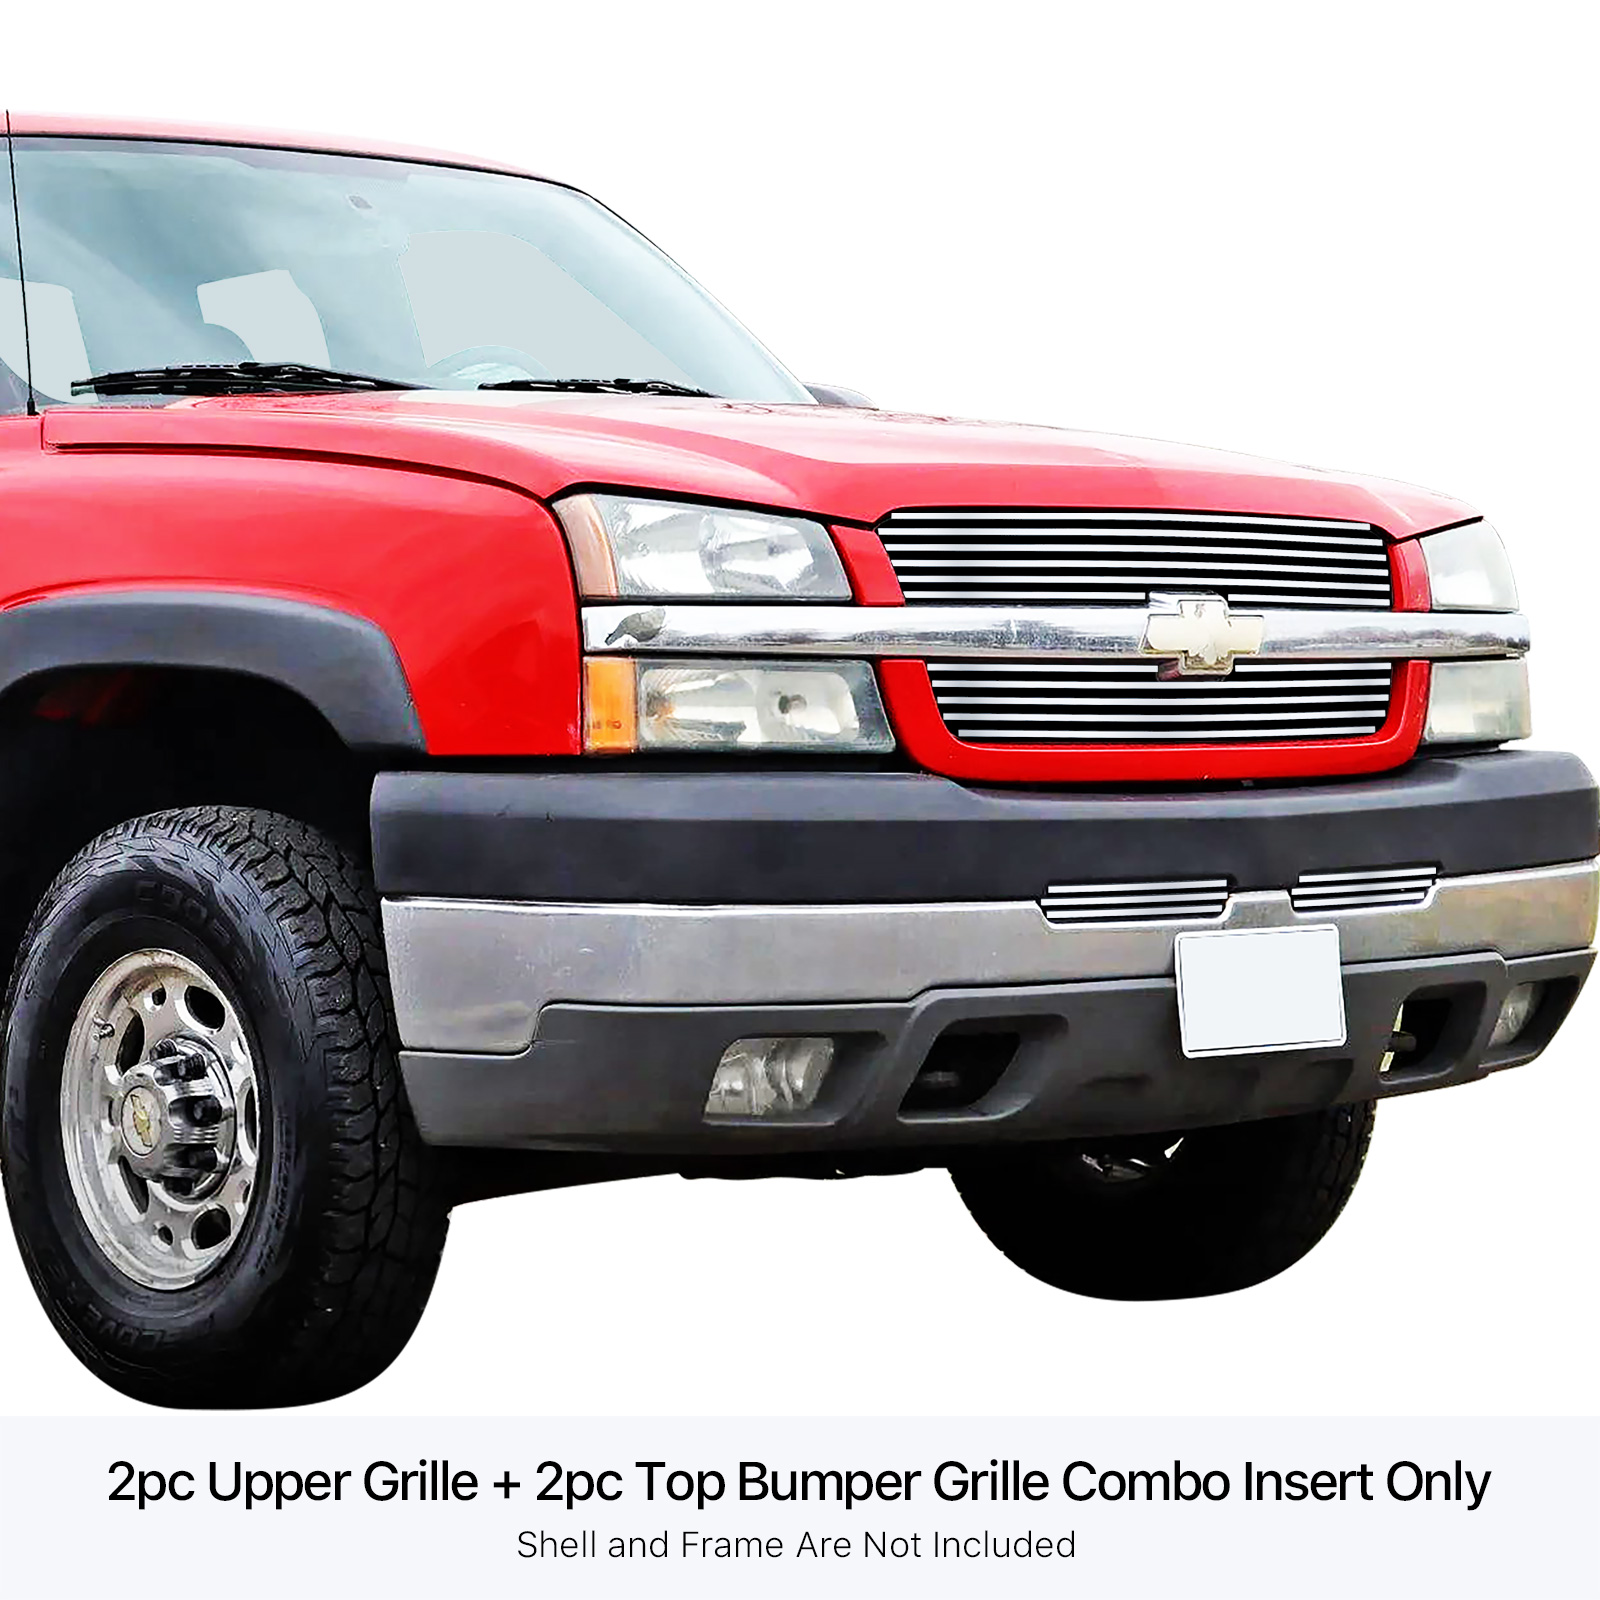 2002-2006 Chevy Avalanche Without Body Cladding/2003-2005 Chevy Silverado 1500/2003-2005 Chevy Silverado 1500 HD/2003-2004 Chevy Silverado 2500/2003-2004 Chevy Silverado 2500 HD/2003-2004 Chevy Silverado 3500 MAIN UPPER + TOP BUMPER Stainless Steel Billet